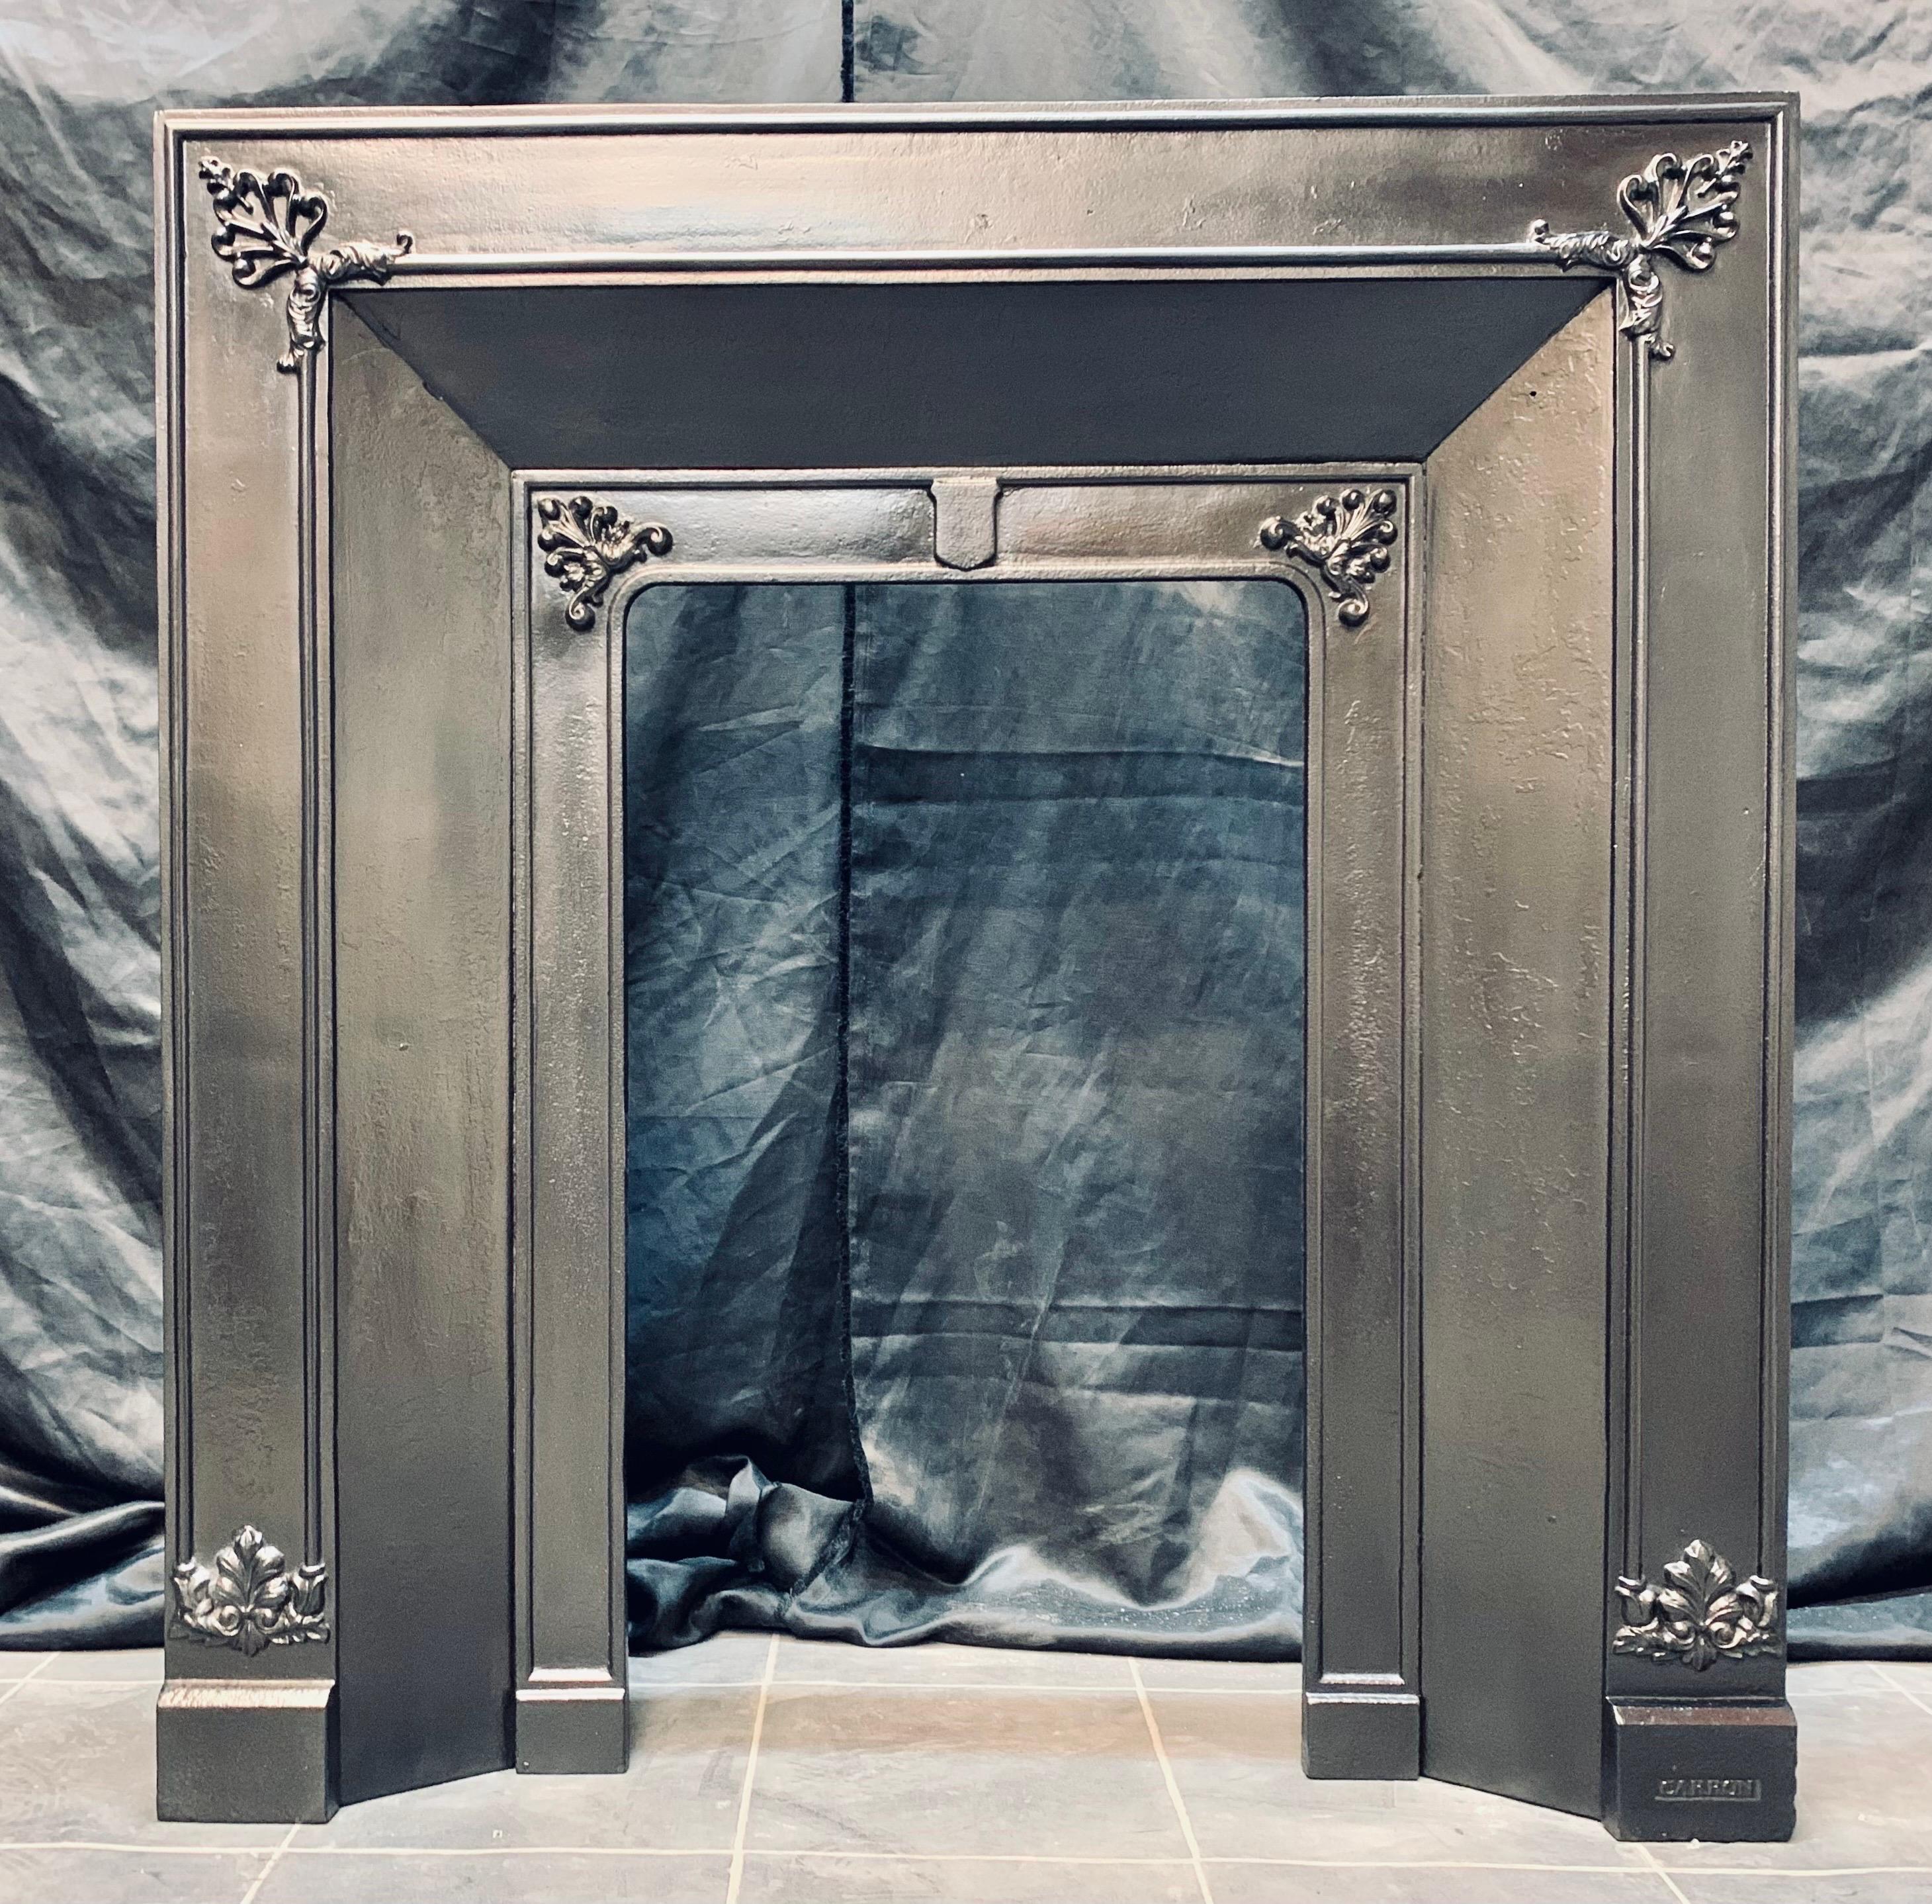 An original Scottish early 19th century cast iron fireplace insert by Carron of Falkirk. A splayed frame with high relief embellishments and a central shield. Stamped carron to the lower right base block. 

Fire opening size: 407 mm wide x 709 mm